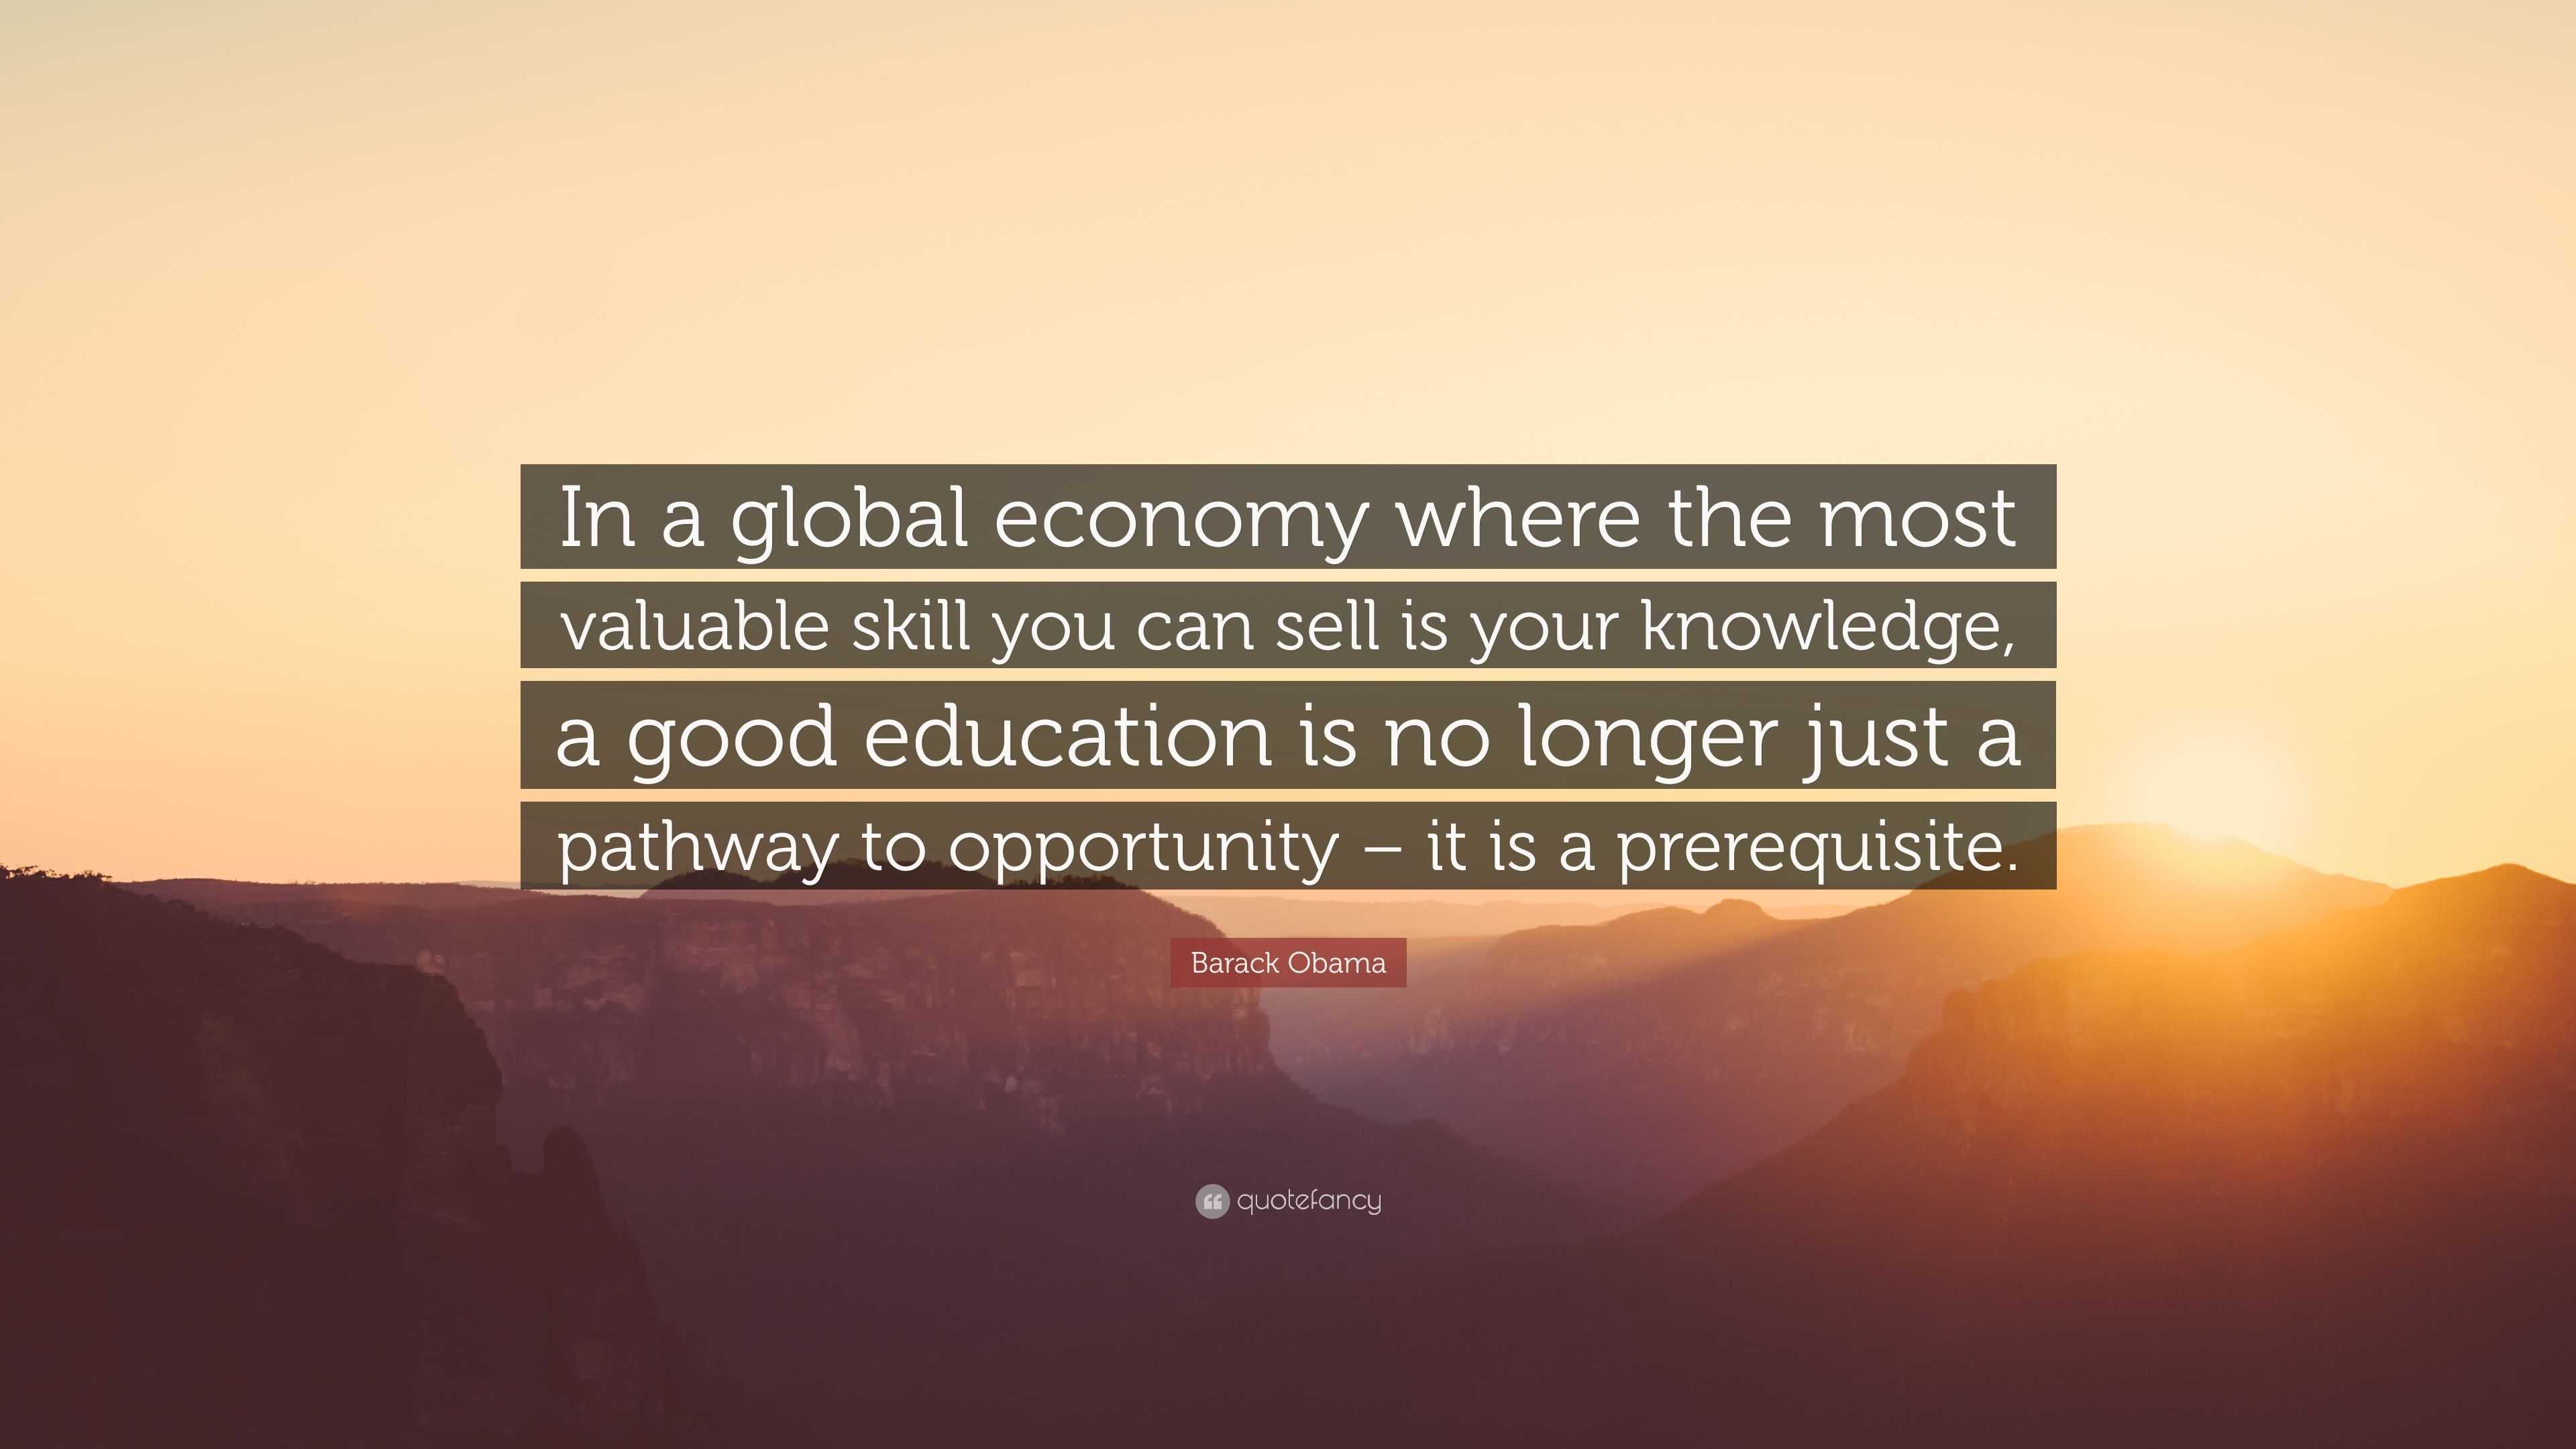 Barack Obama Quote “in A Global Economy Where The Most Valuable Skill